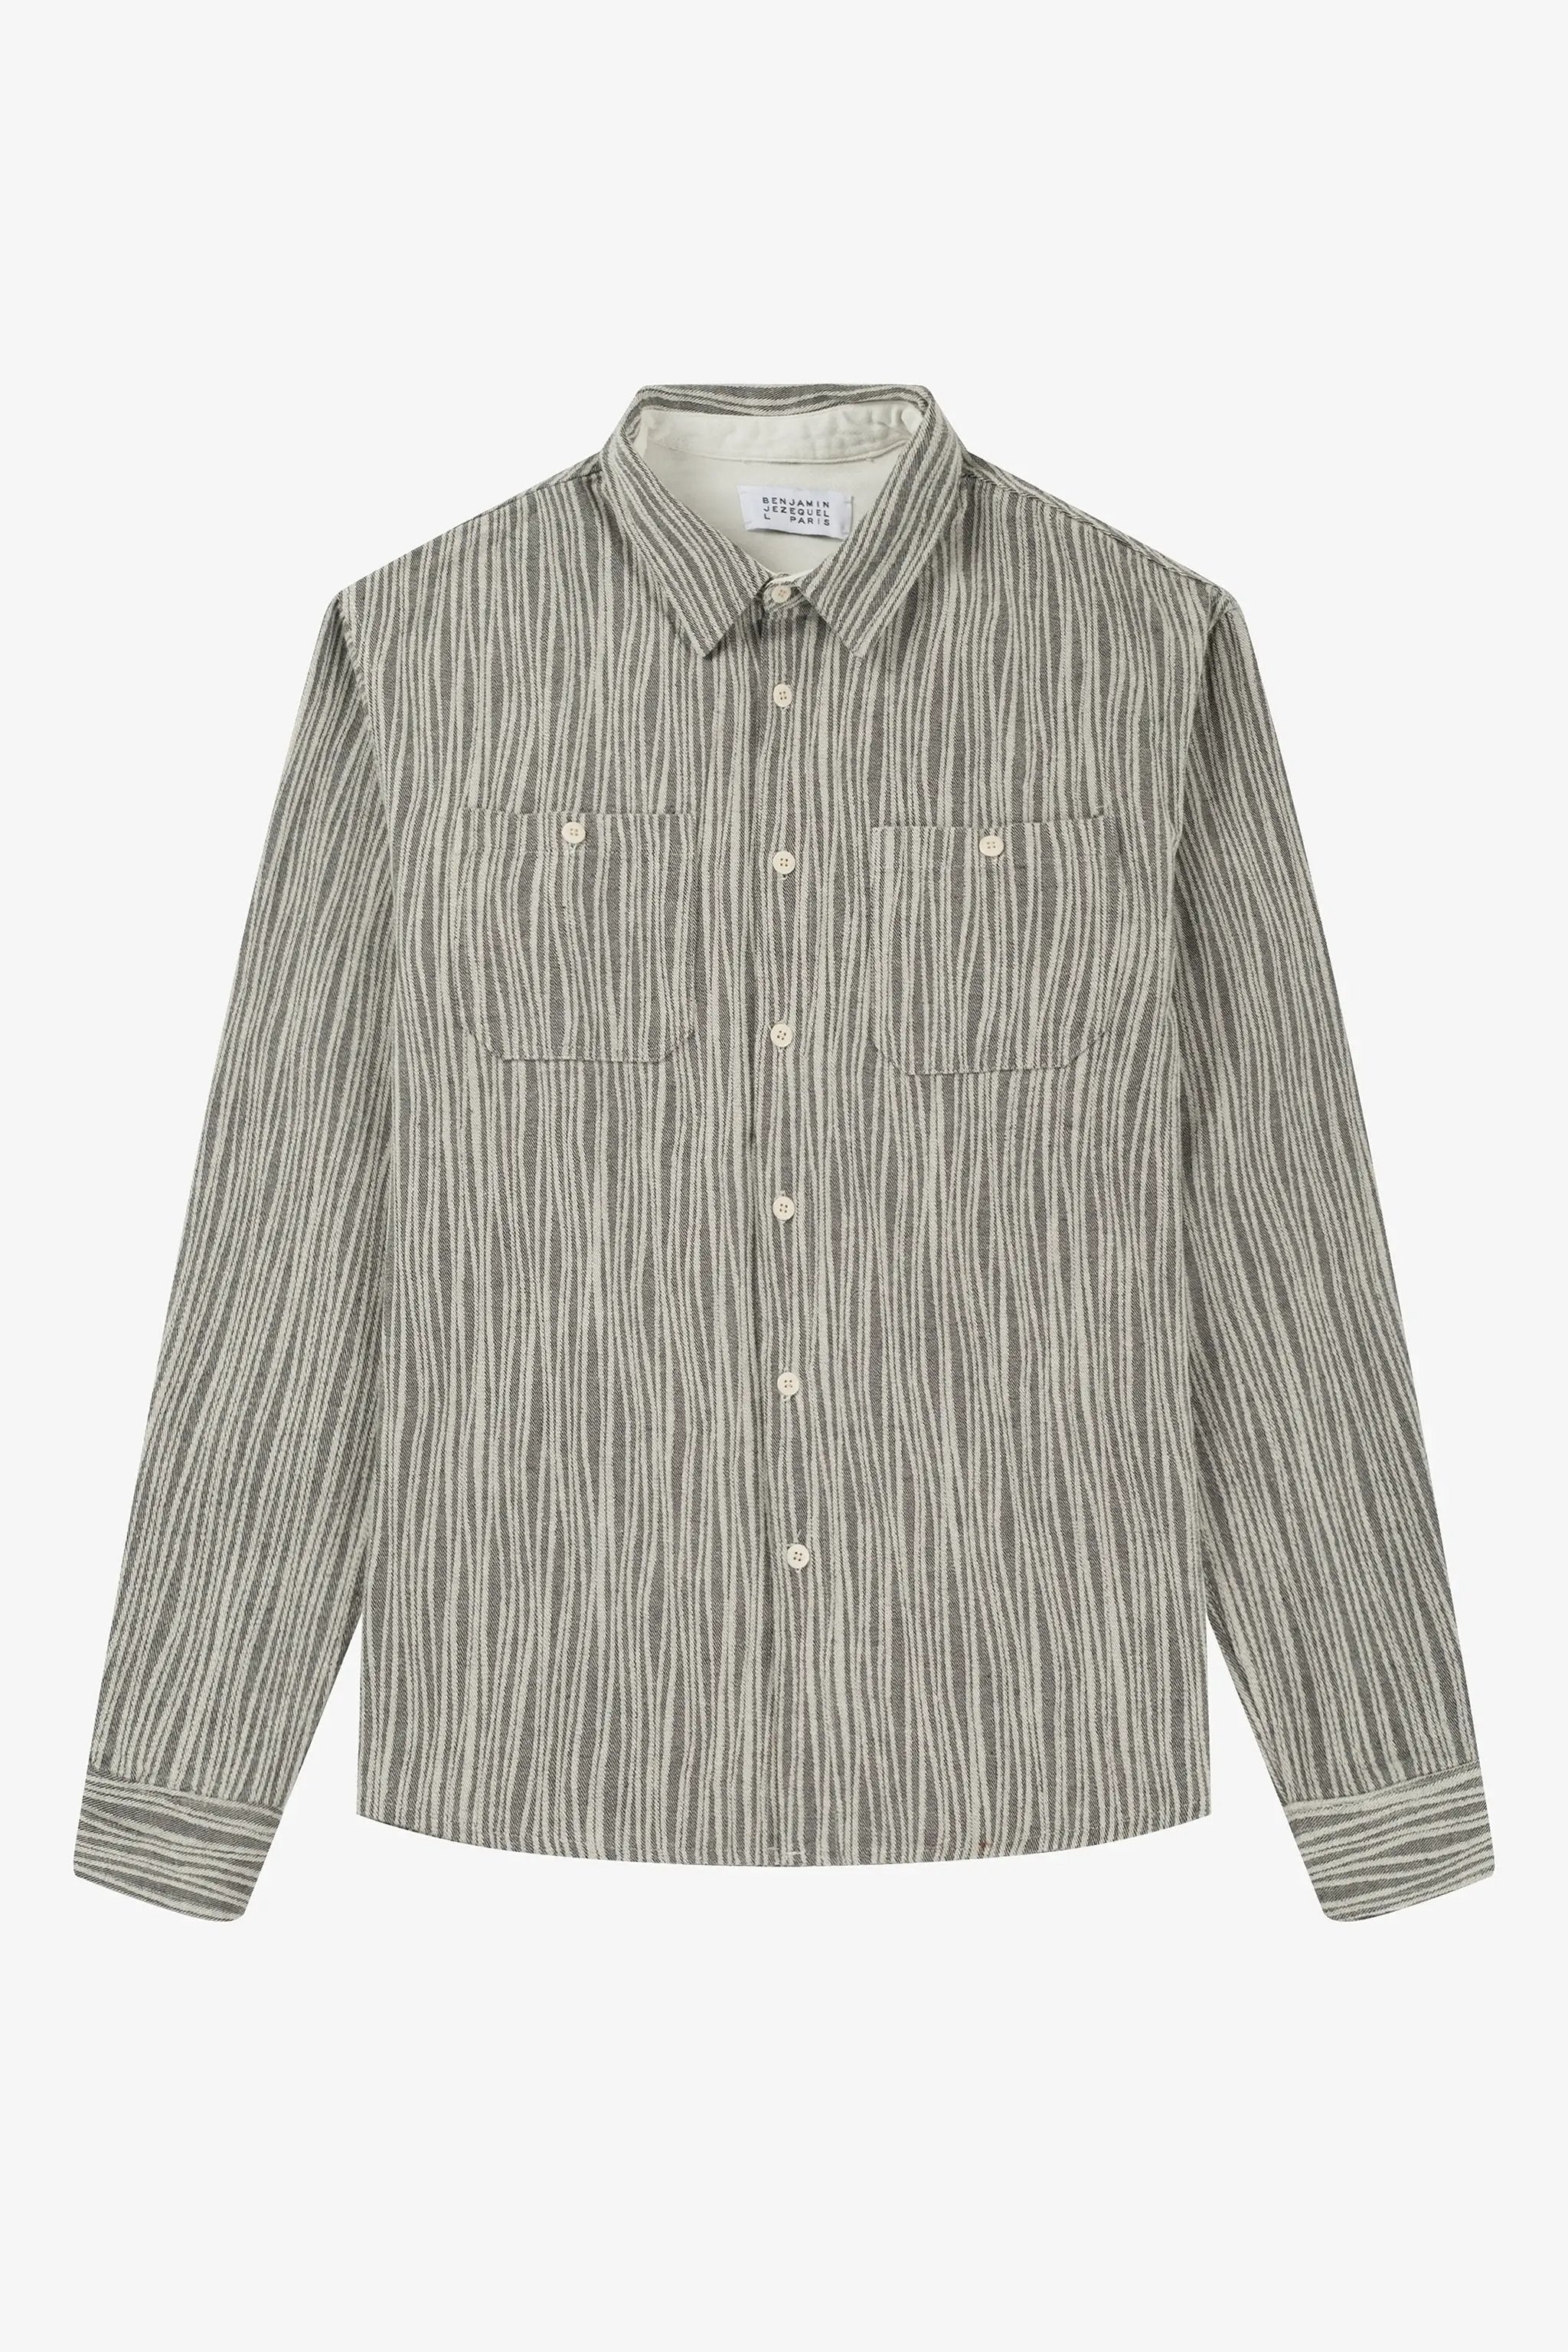 a shirt with a striped pattern on the chest